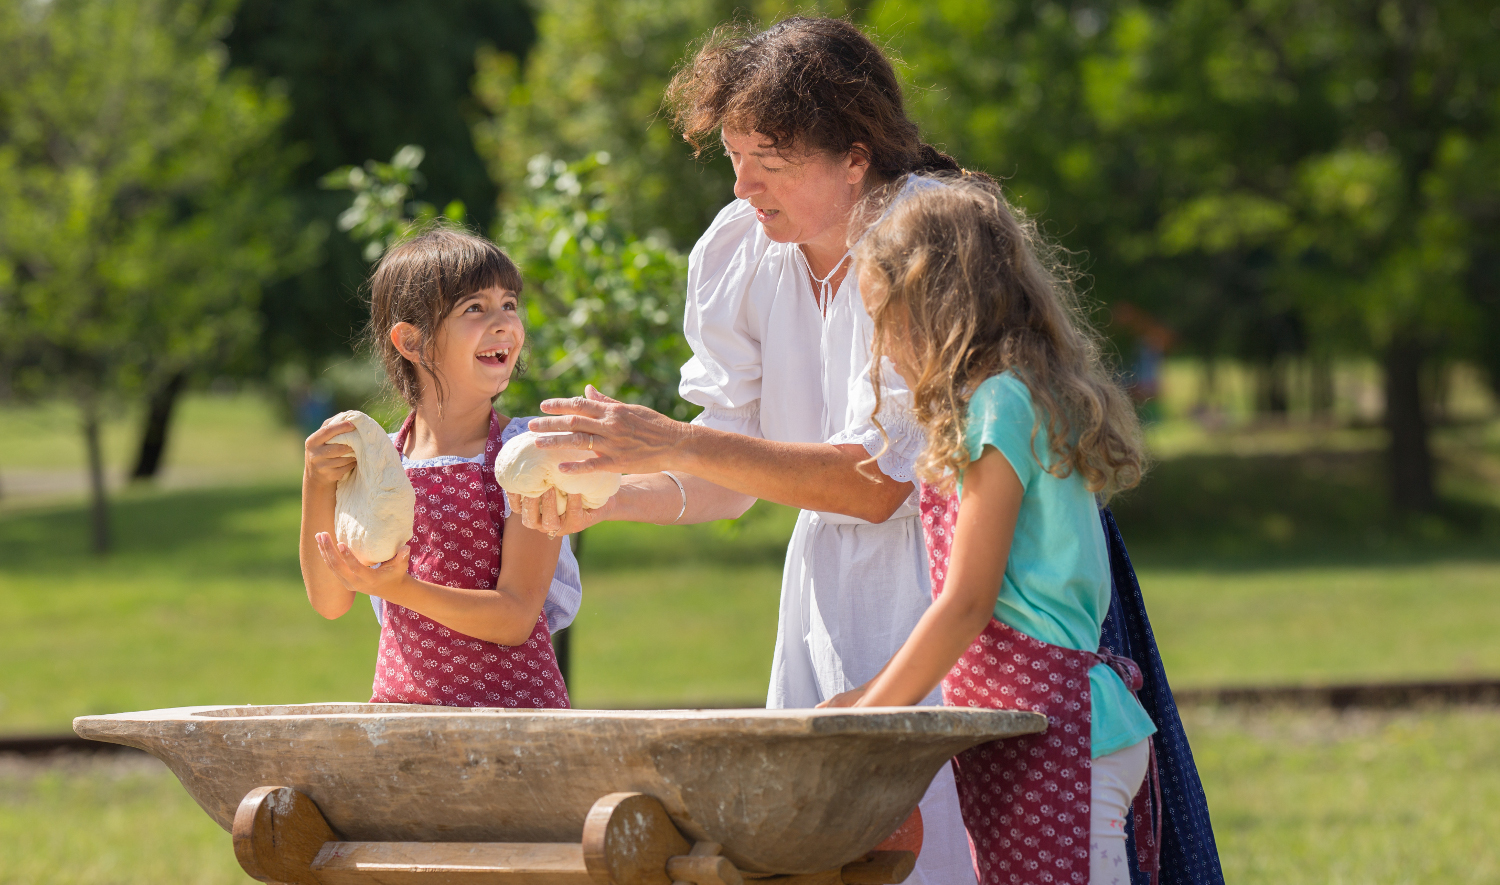 © Hungarian Open Air Museum This photograph depicts a person showing to children how to handle dough. They stand outside behind a wooden trough.